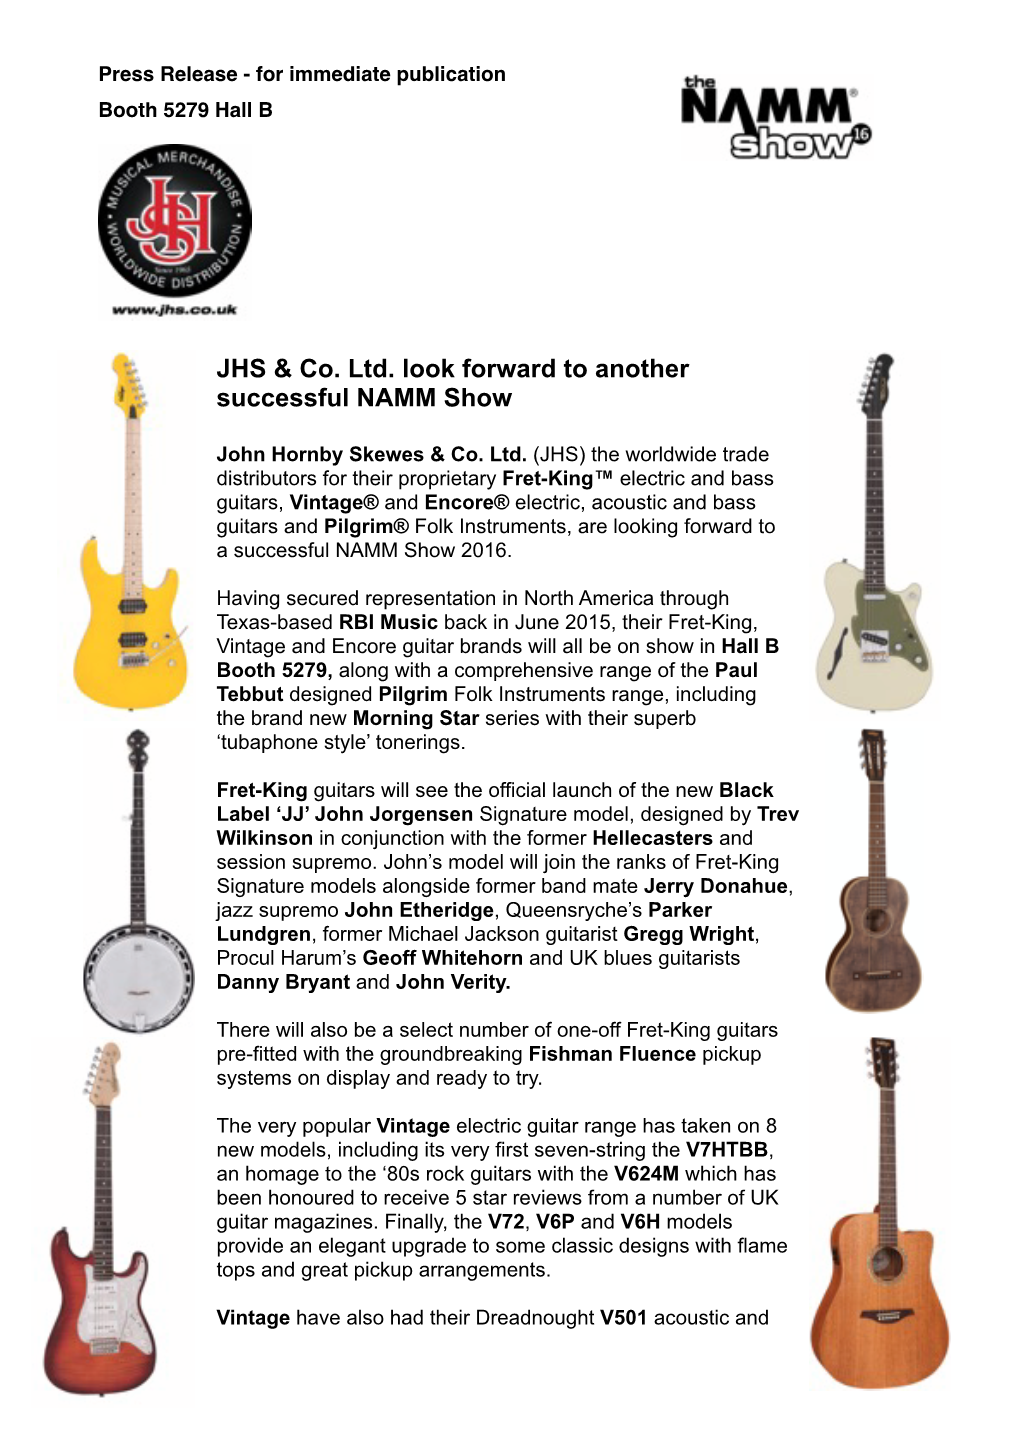 JHS & Co. Ltd. Look Forward to Another Successful NAMM Show